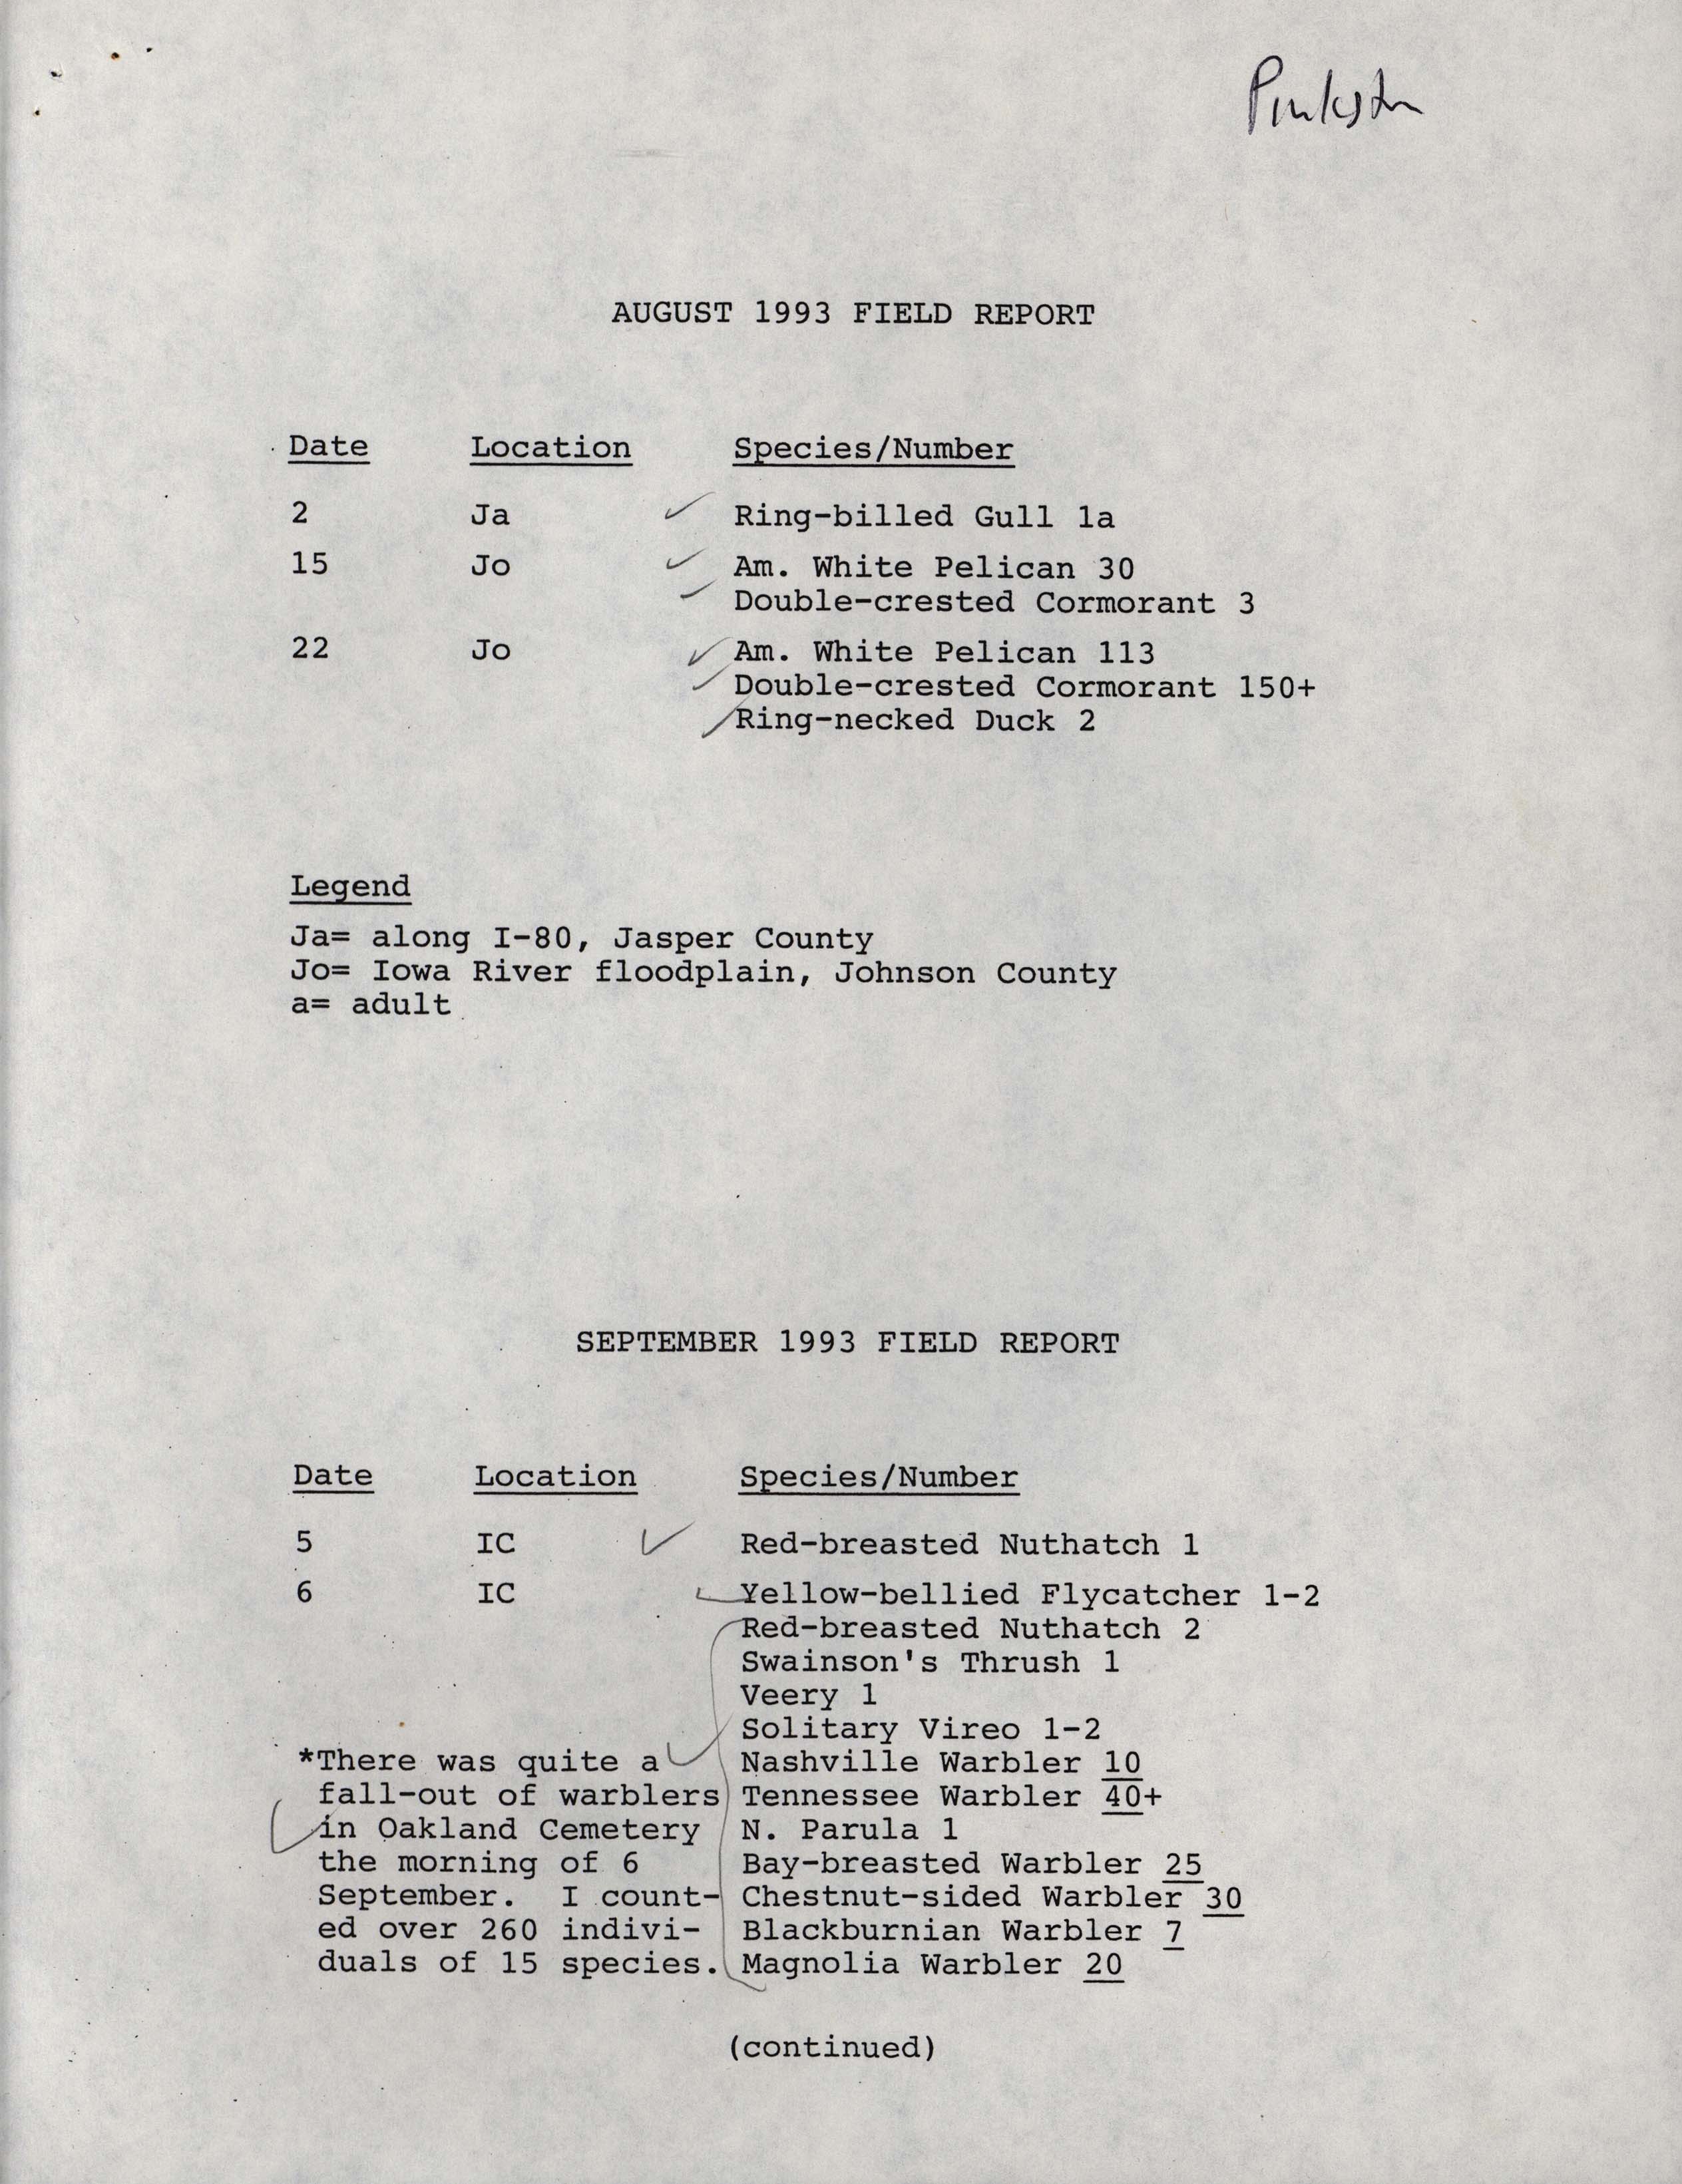 Field notes contributed by Randall Pinkston, fall 1993